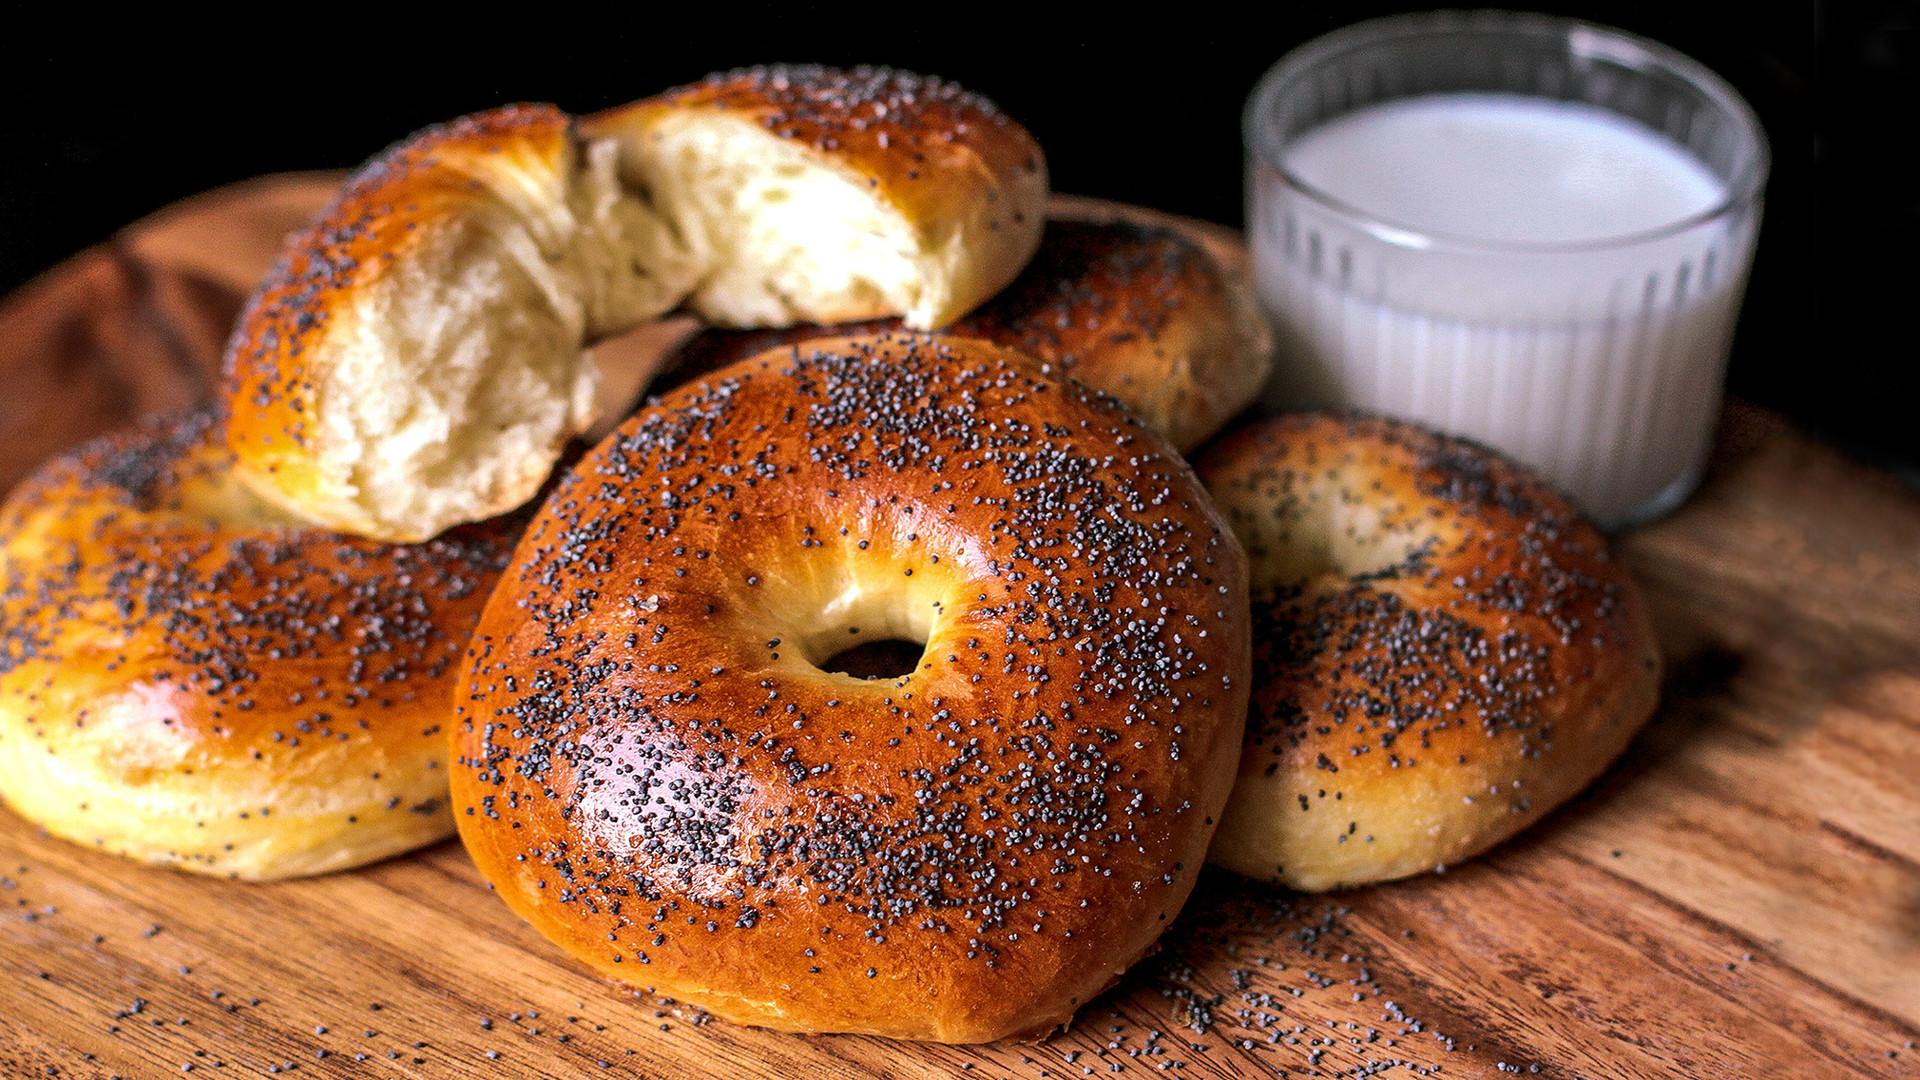 Bubliki are a close relative of the bagel.